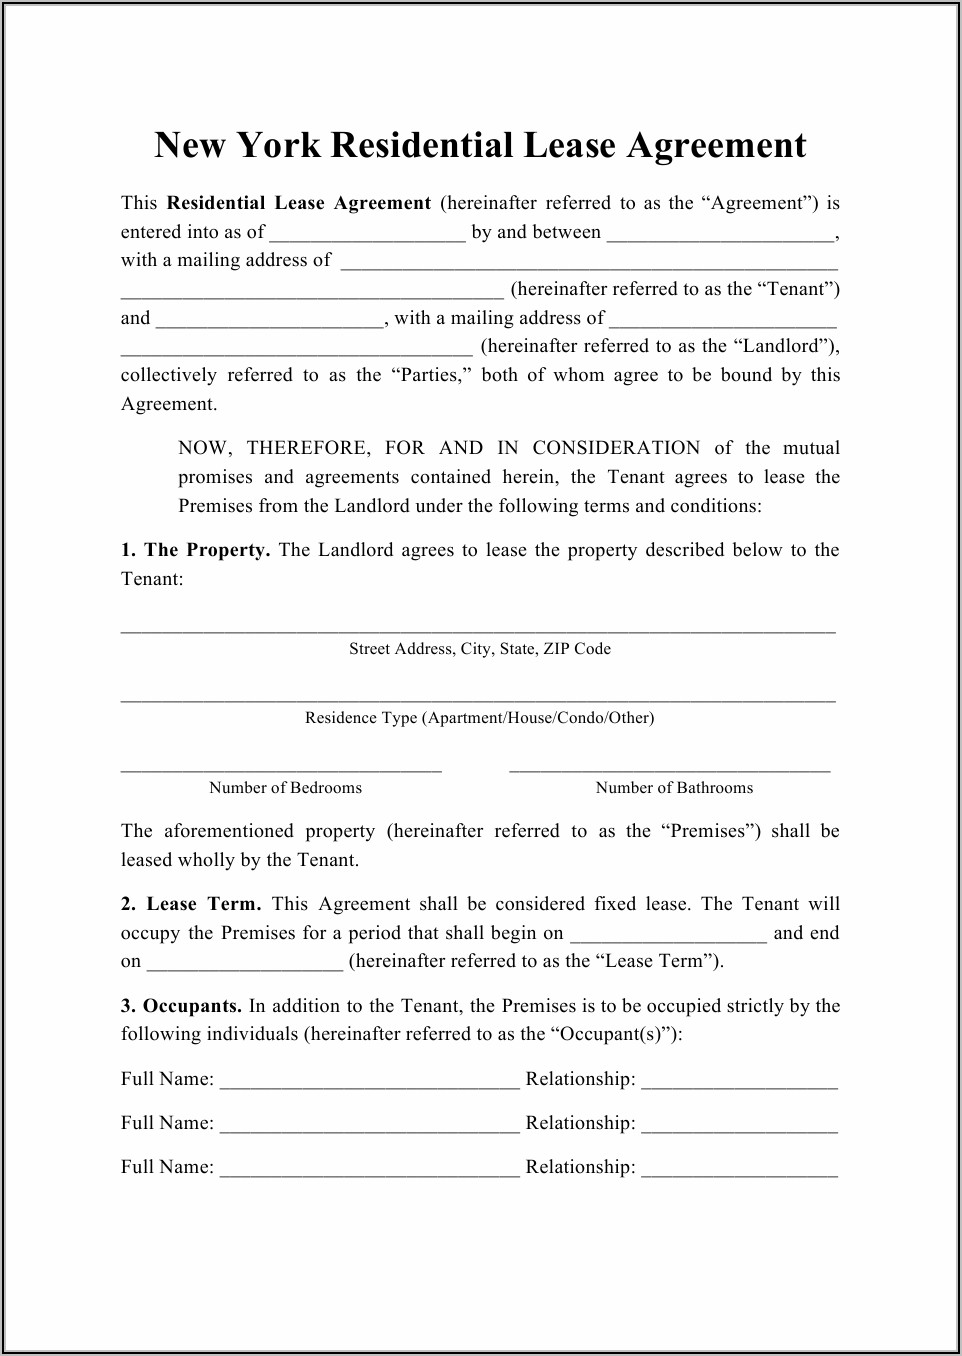 New York State Rental Lease Agreement Form